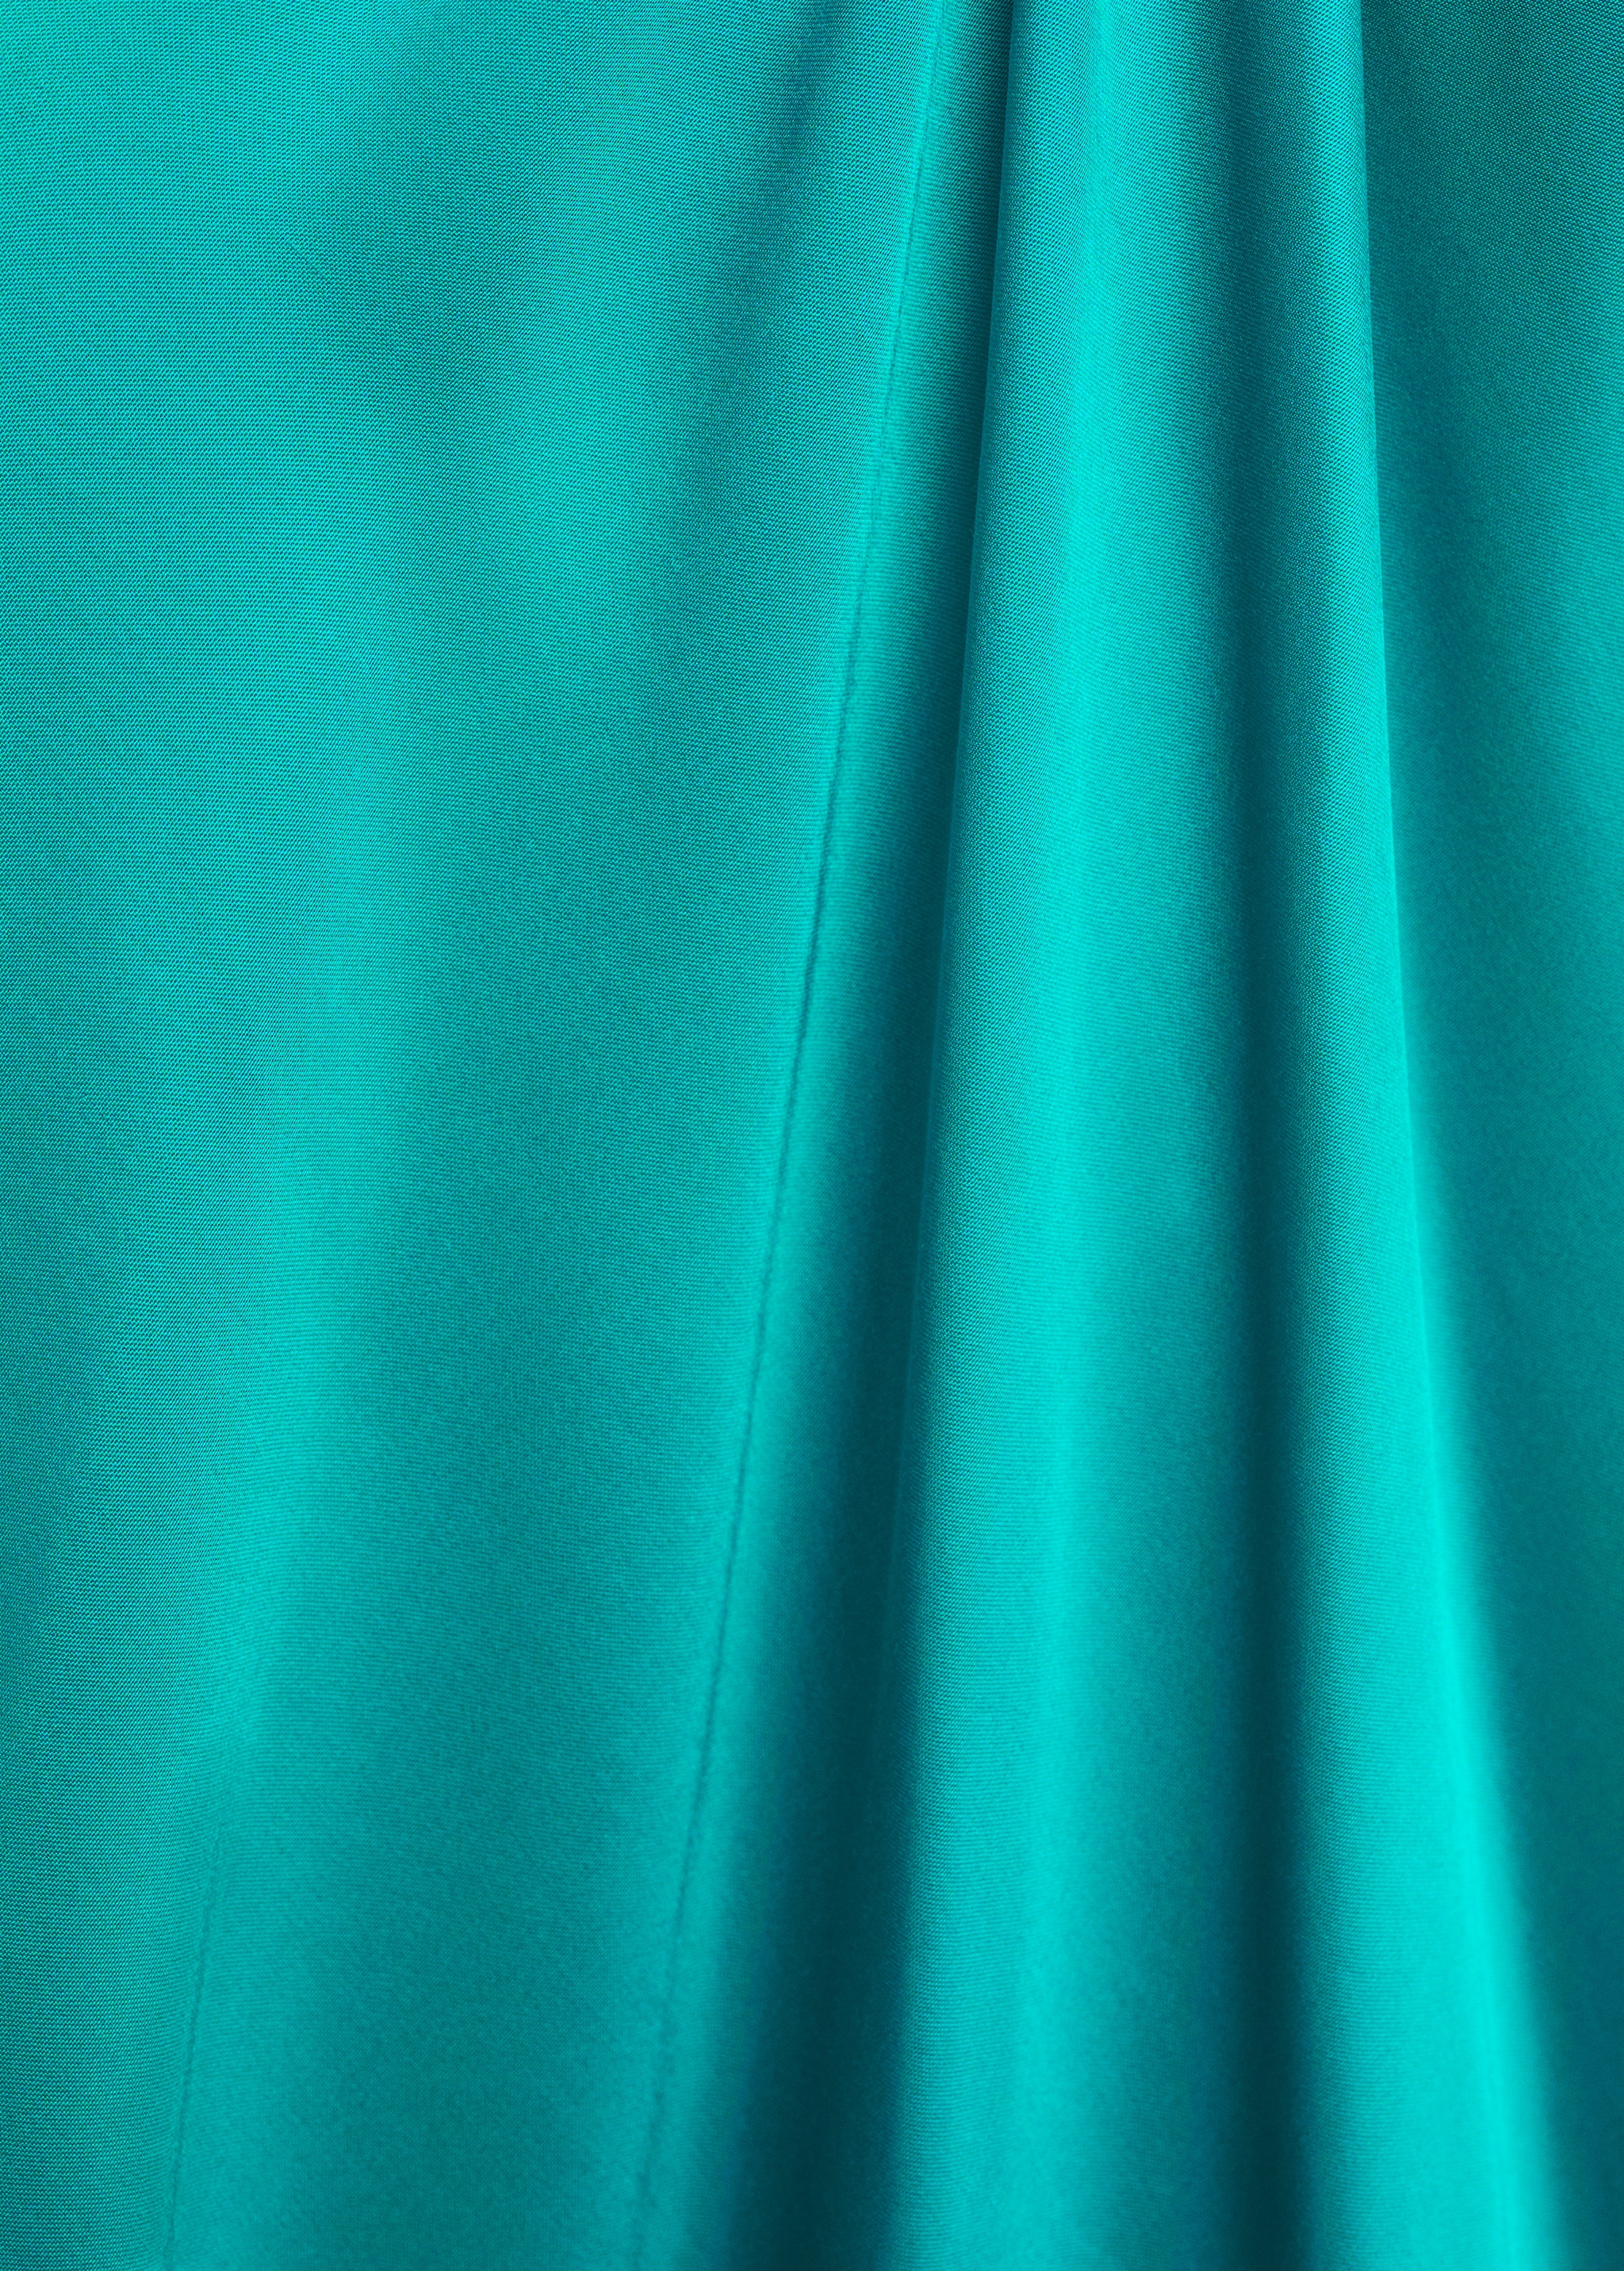 Strapless satin dress - Details of the article 8